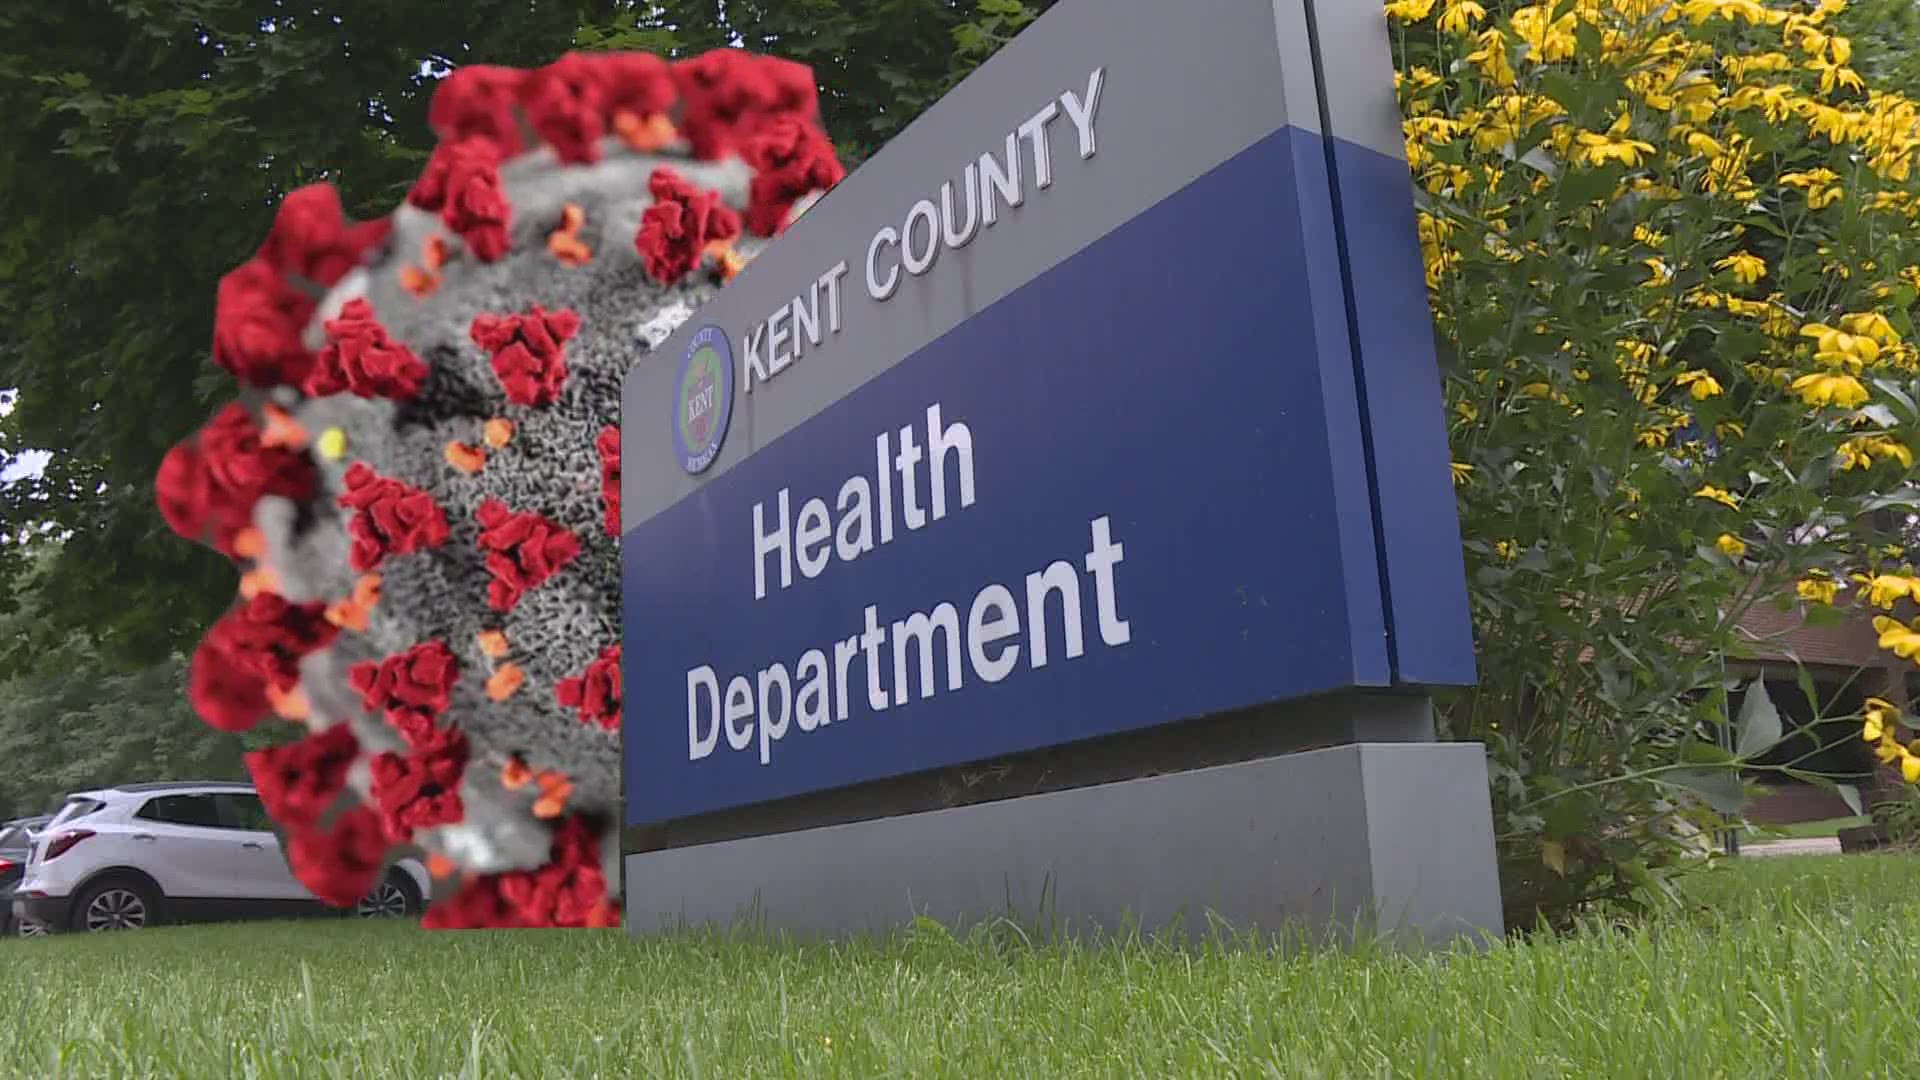 The Kent County Health Department says it has received hundreds of complaints of executive order violations ranging from large gatherings to mask violations.